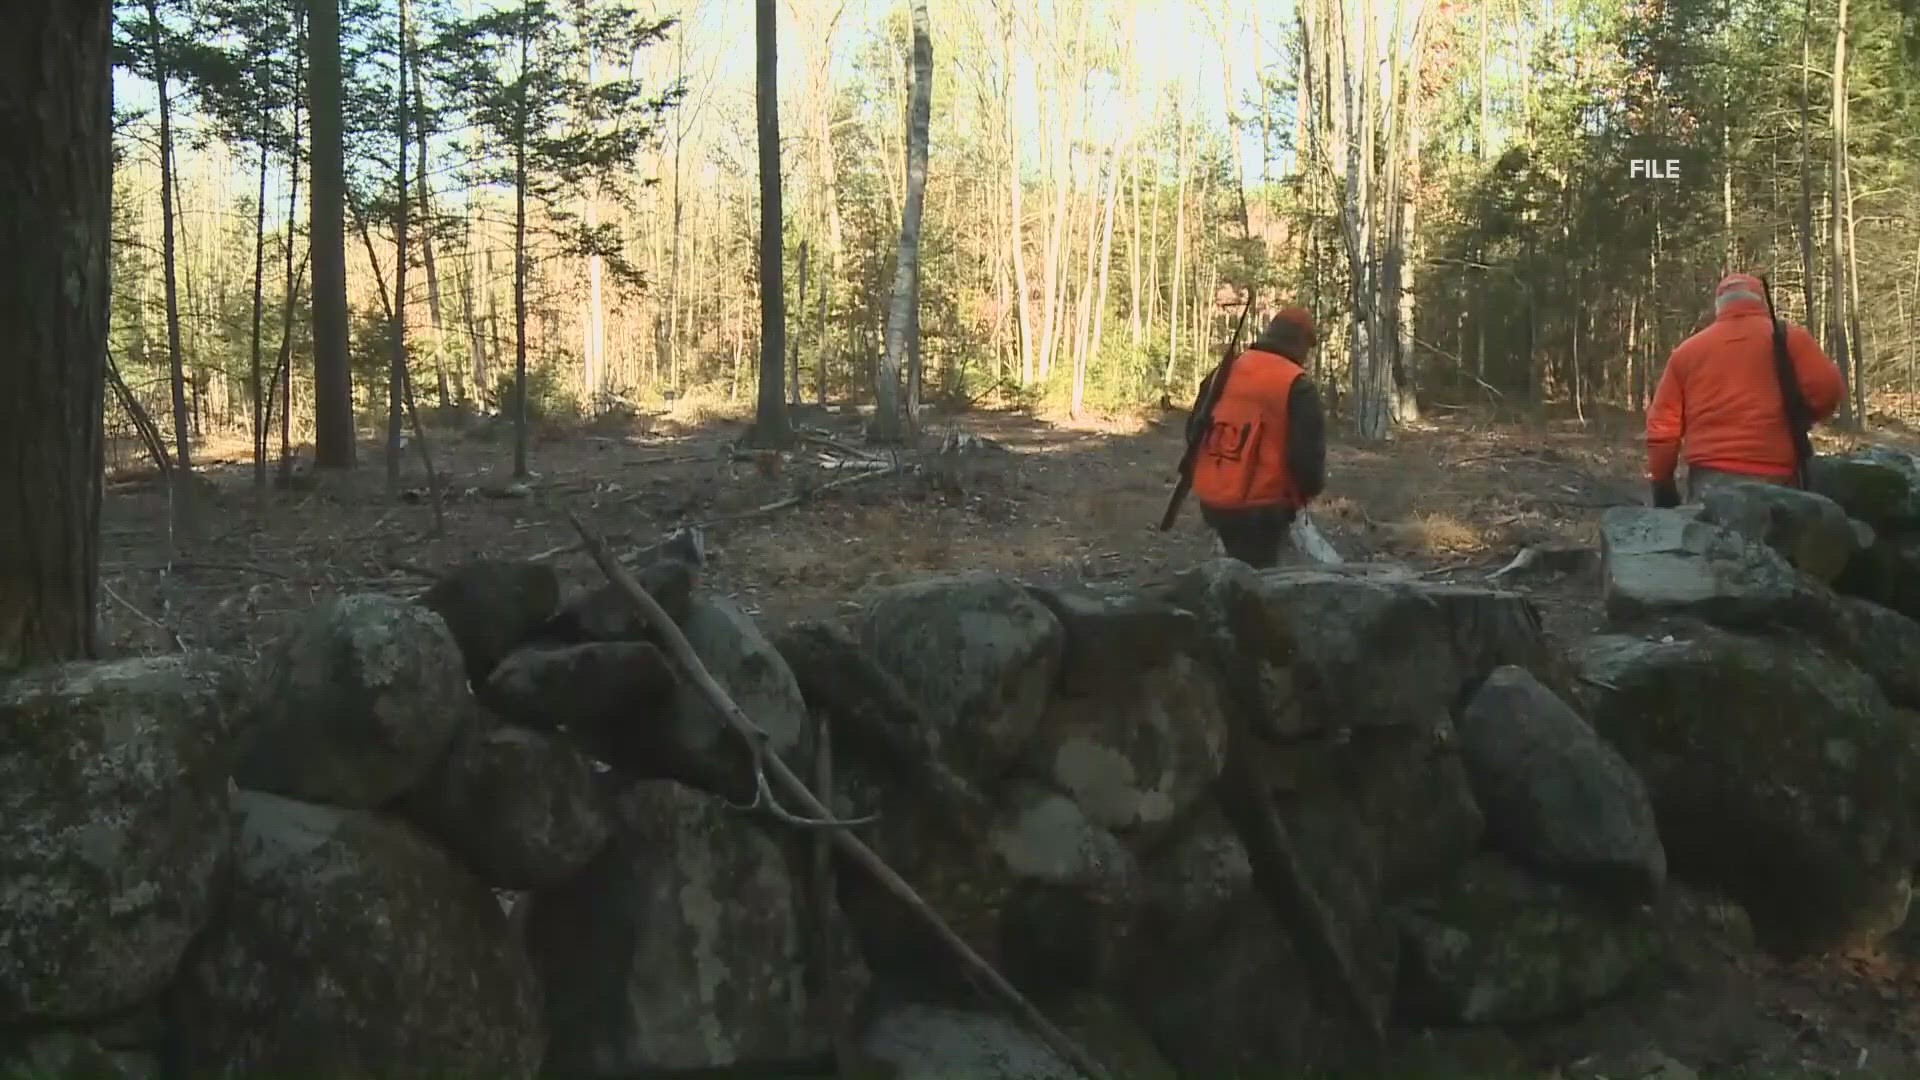 A group called Maine Hunters for Sunday Hunting said it's planning to hold a news conference to announce a new bill sponsored by Rep. Sophia Warren of Scarborough.